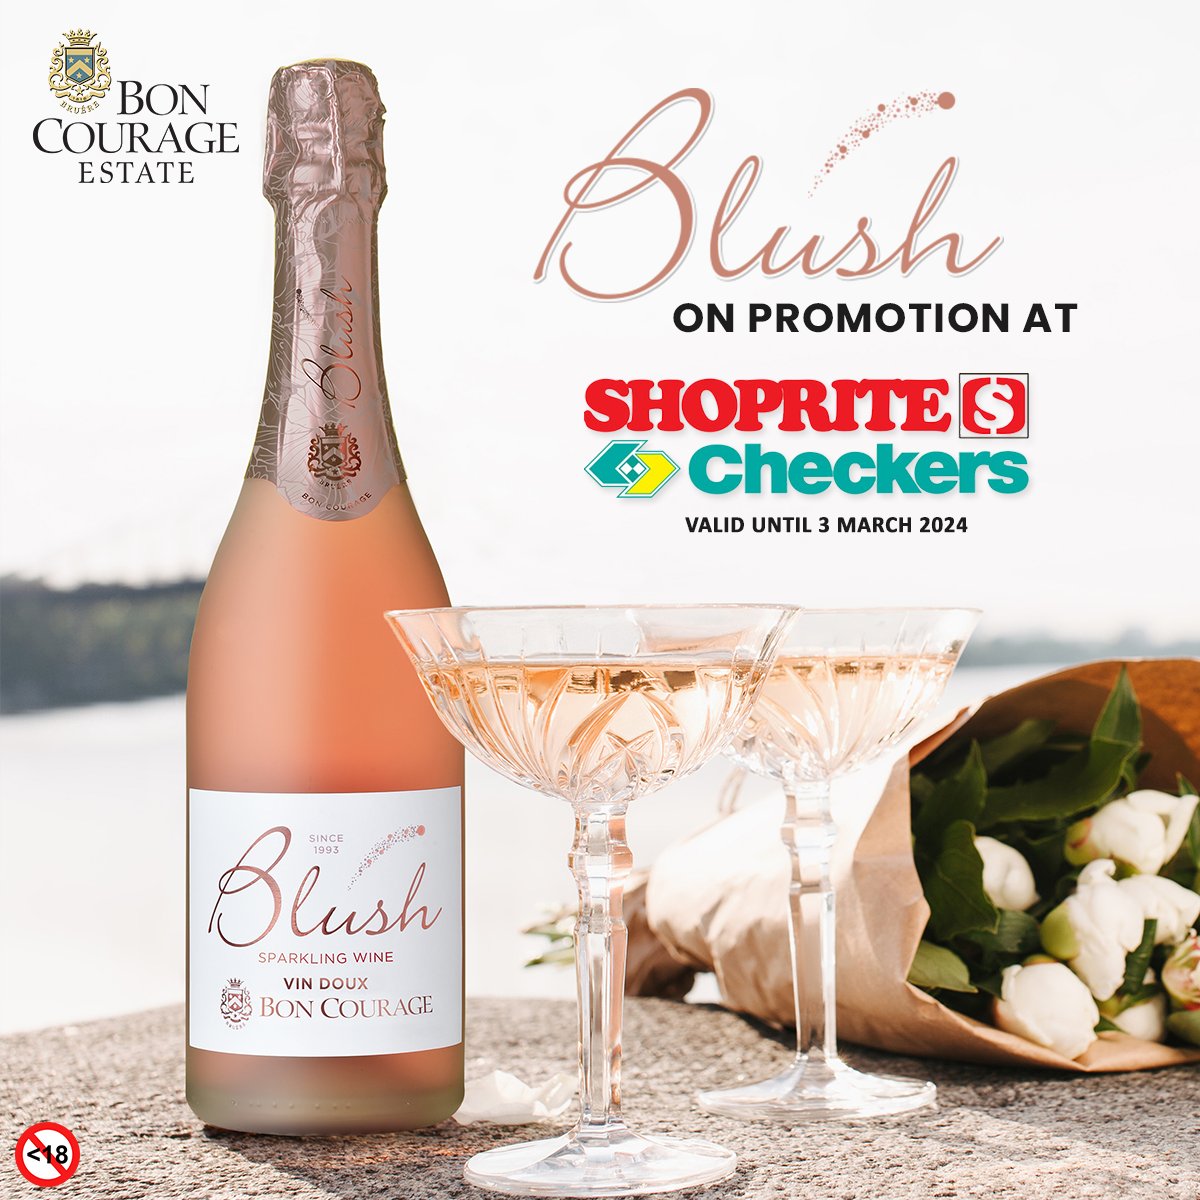 NATIONAL PROMO NOW ON !! 👉 ...🟡CHECKERS 👉 ...🔴SHOPRITE SHOP & SAVE NOW ~ 🍾BON COURAGE BLUSH VIN DOUX on 𝗣𝗥𝗢𝗠𝗢𝗧𝗜𝗢𝗡!🍾 T's & C's Apply Valid until 3 March #boncourage #exceptionalquality #promotion #wine #blush #winepromo #sipandsave